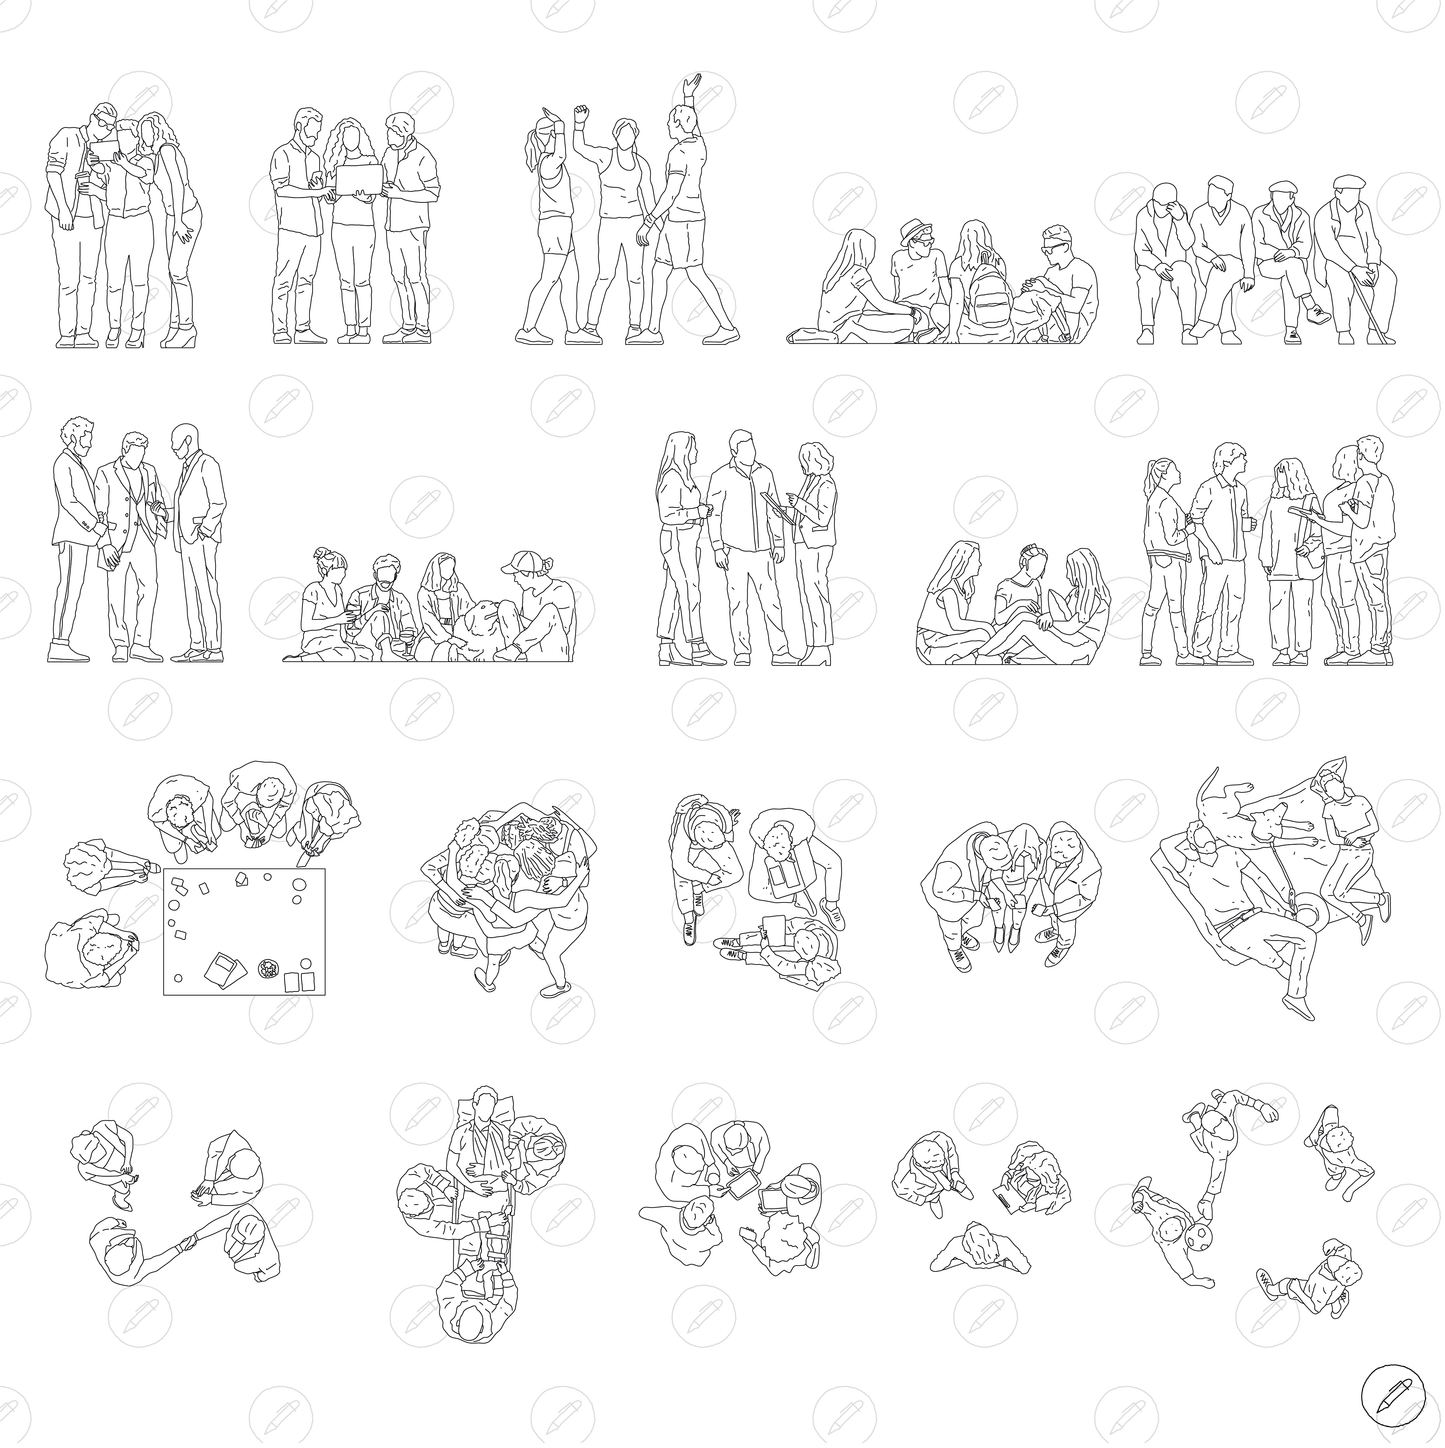 Cad & Vector - People Groups